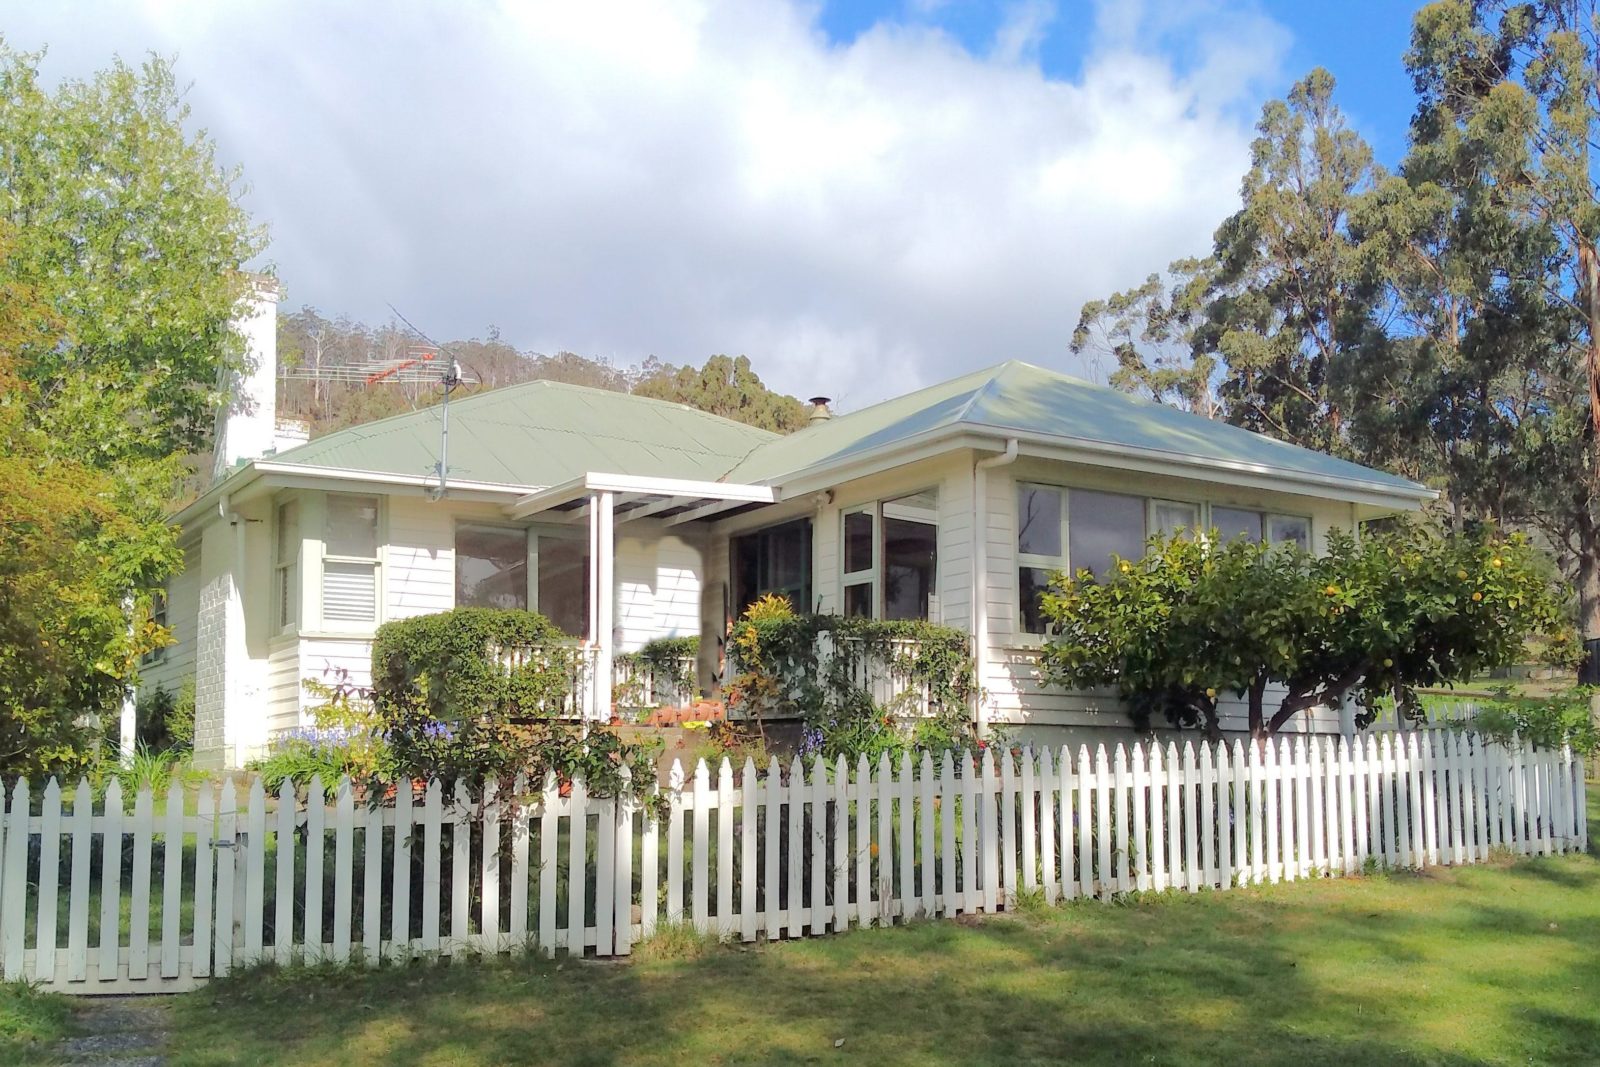 Huon River Country Cottae is set in a pretty garden and rural landscape